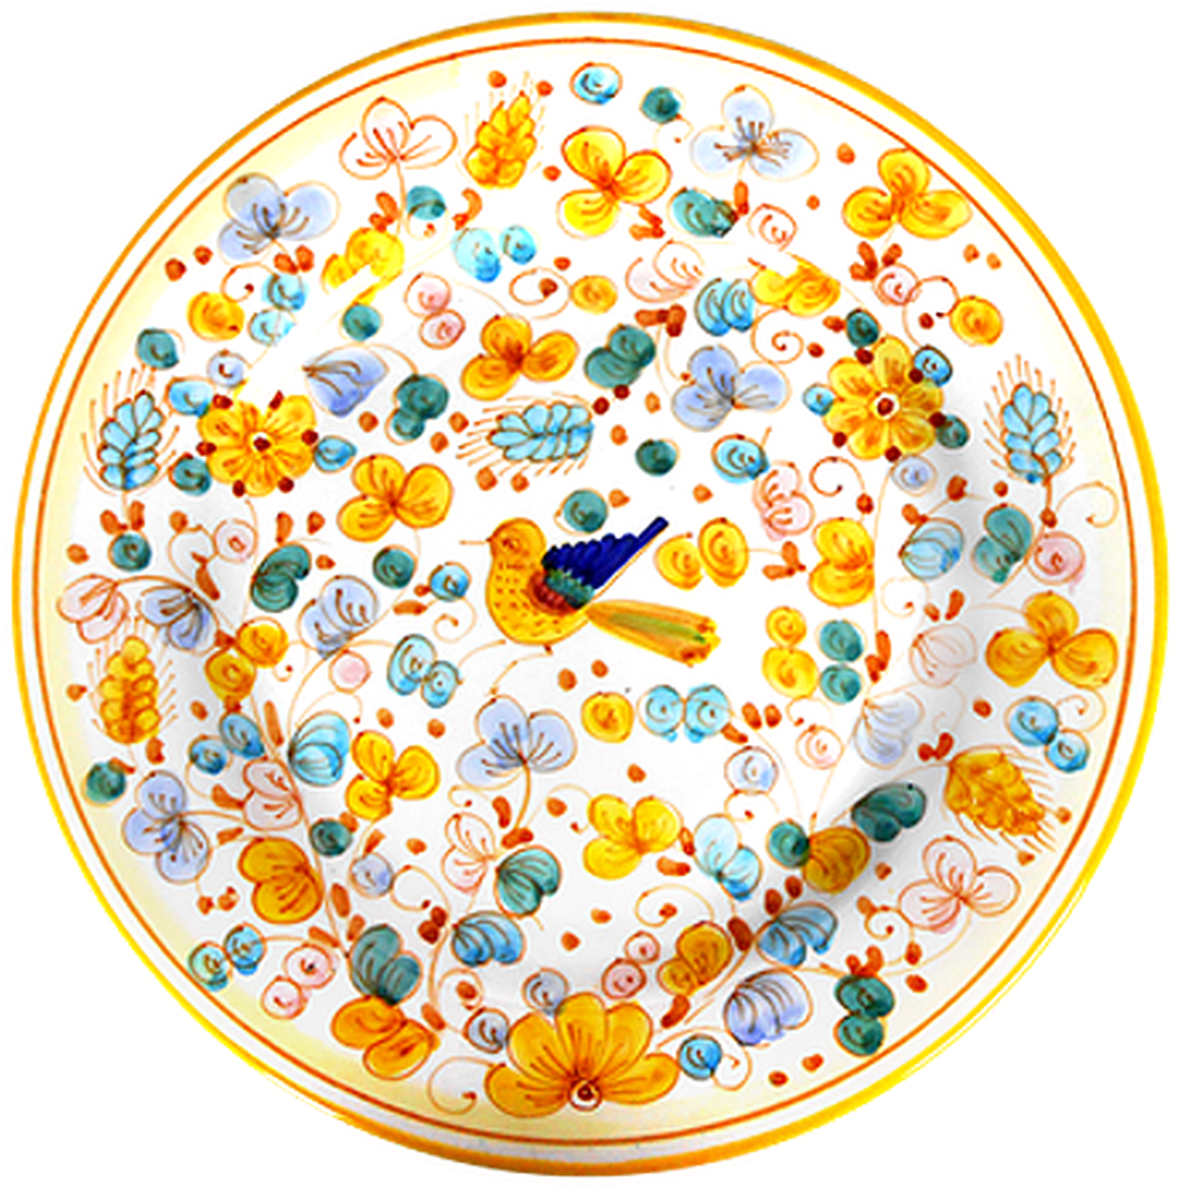 A Plate With A Bird And Flowers